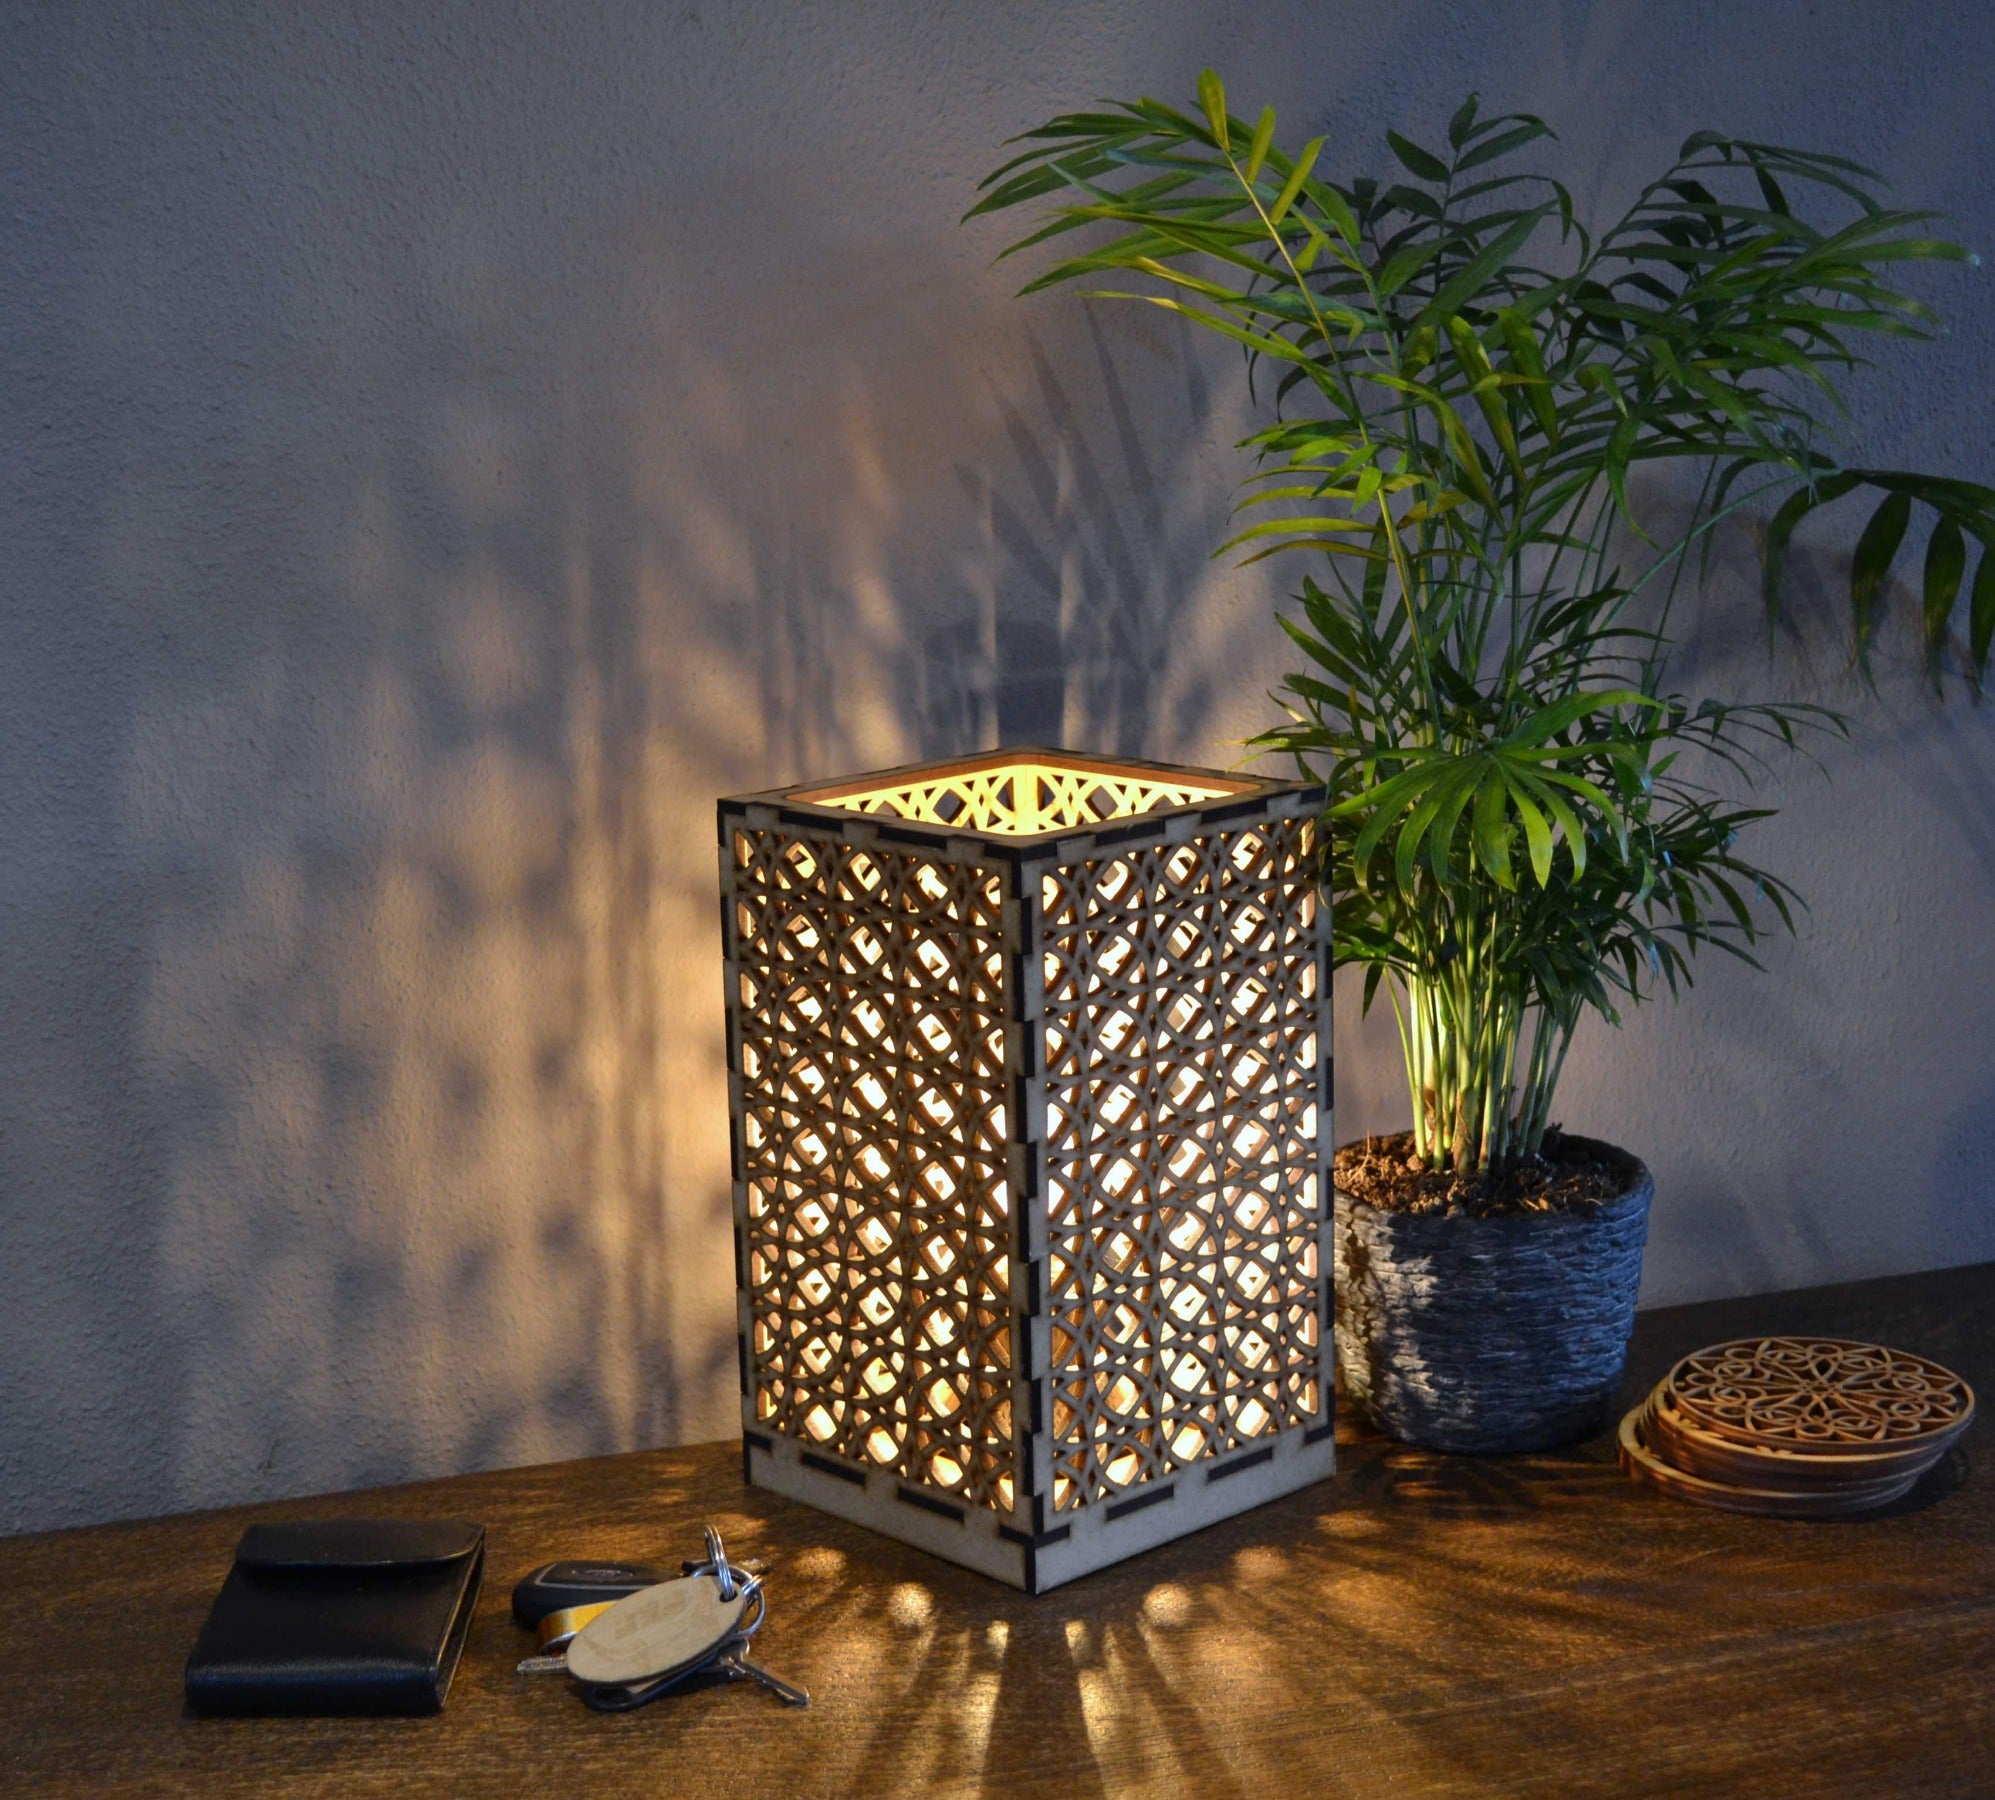 Sweet Home Trends® Box Lamp met Connected Circles Patroon